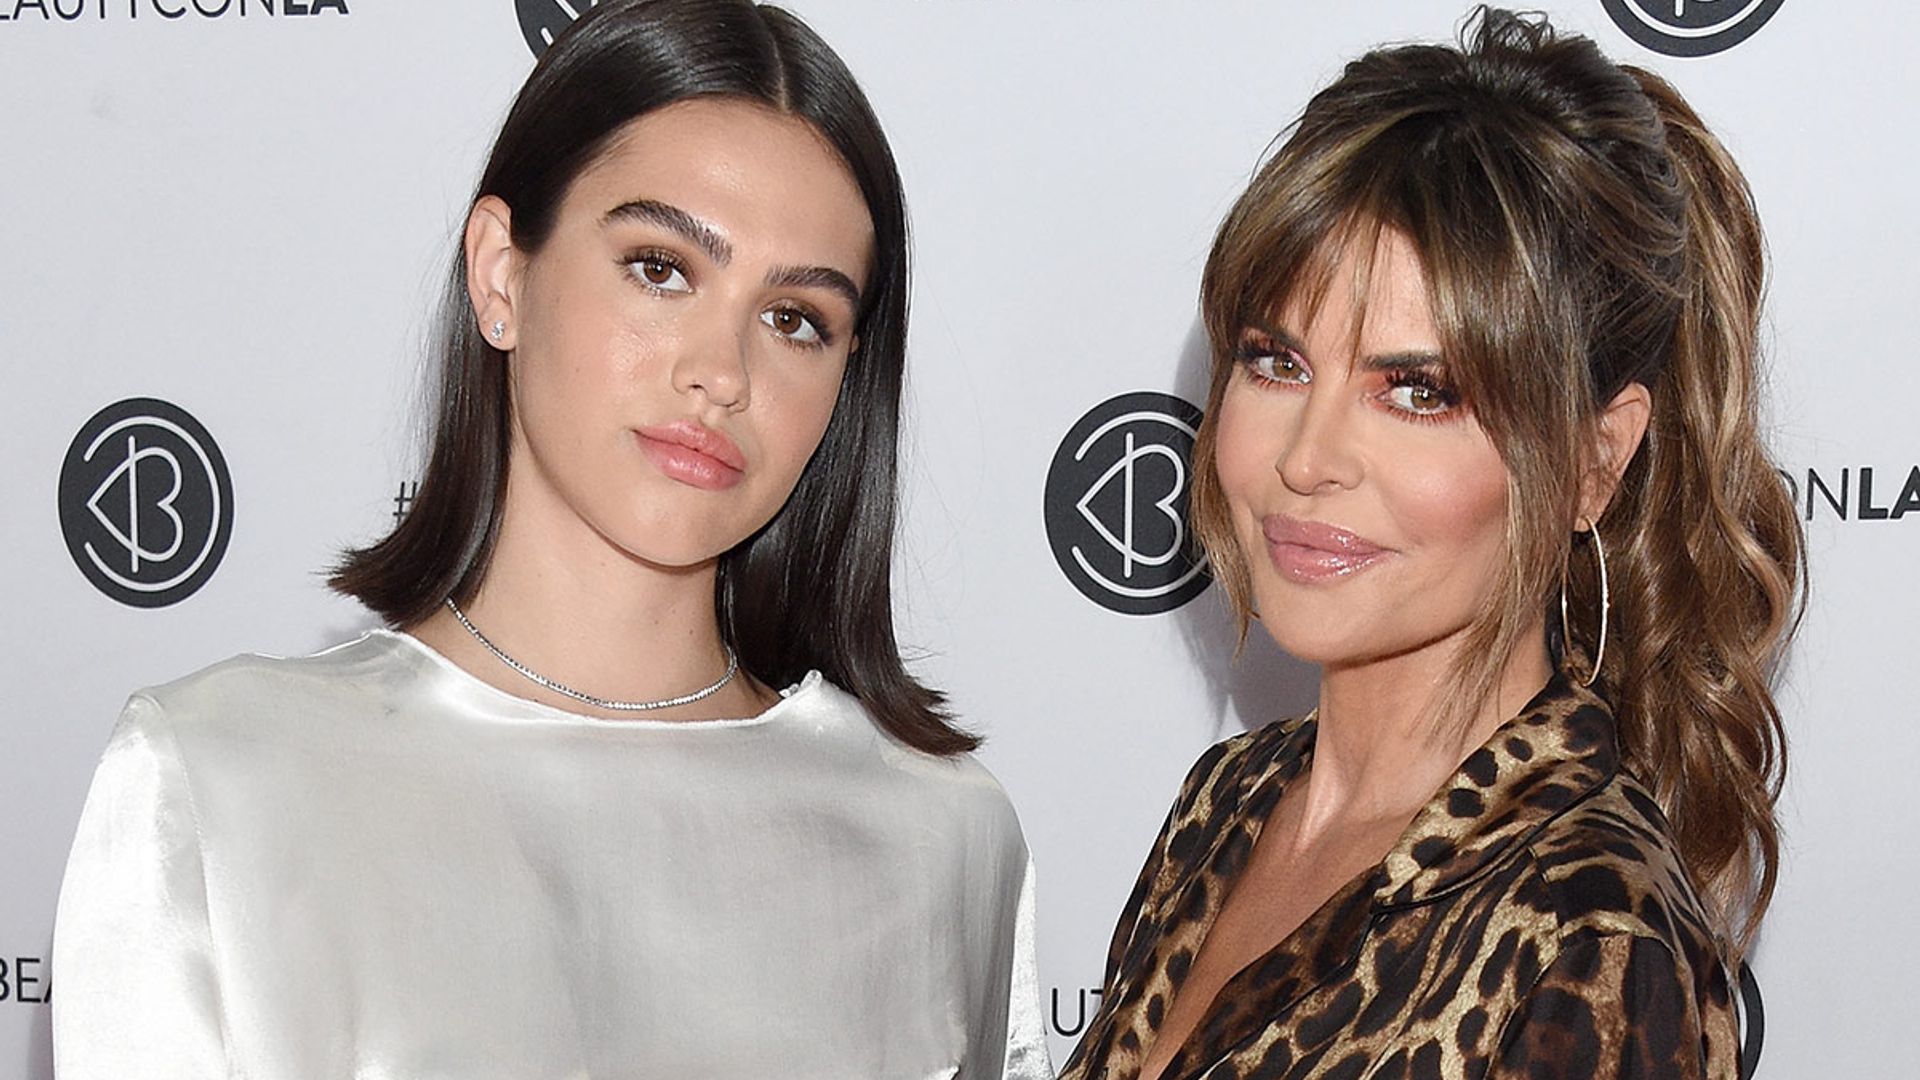 Lisa Rinna shares delight following daughter Amelia's major achievement